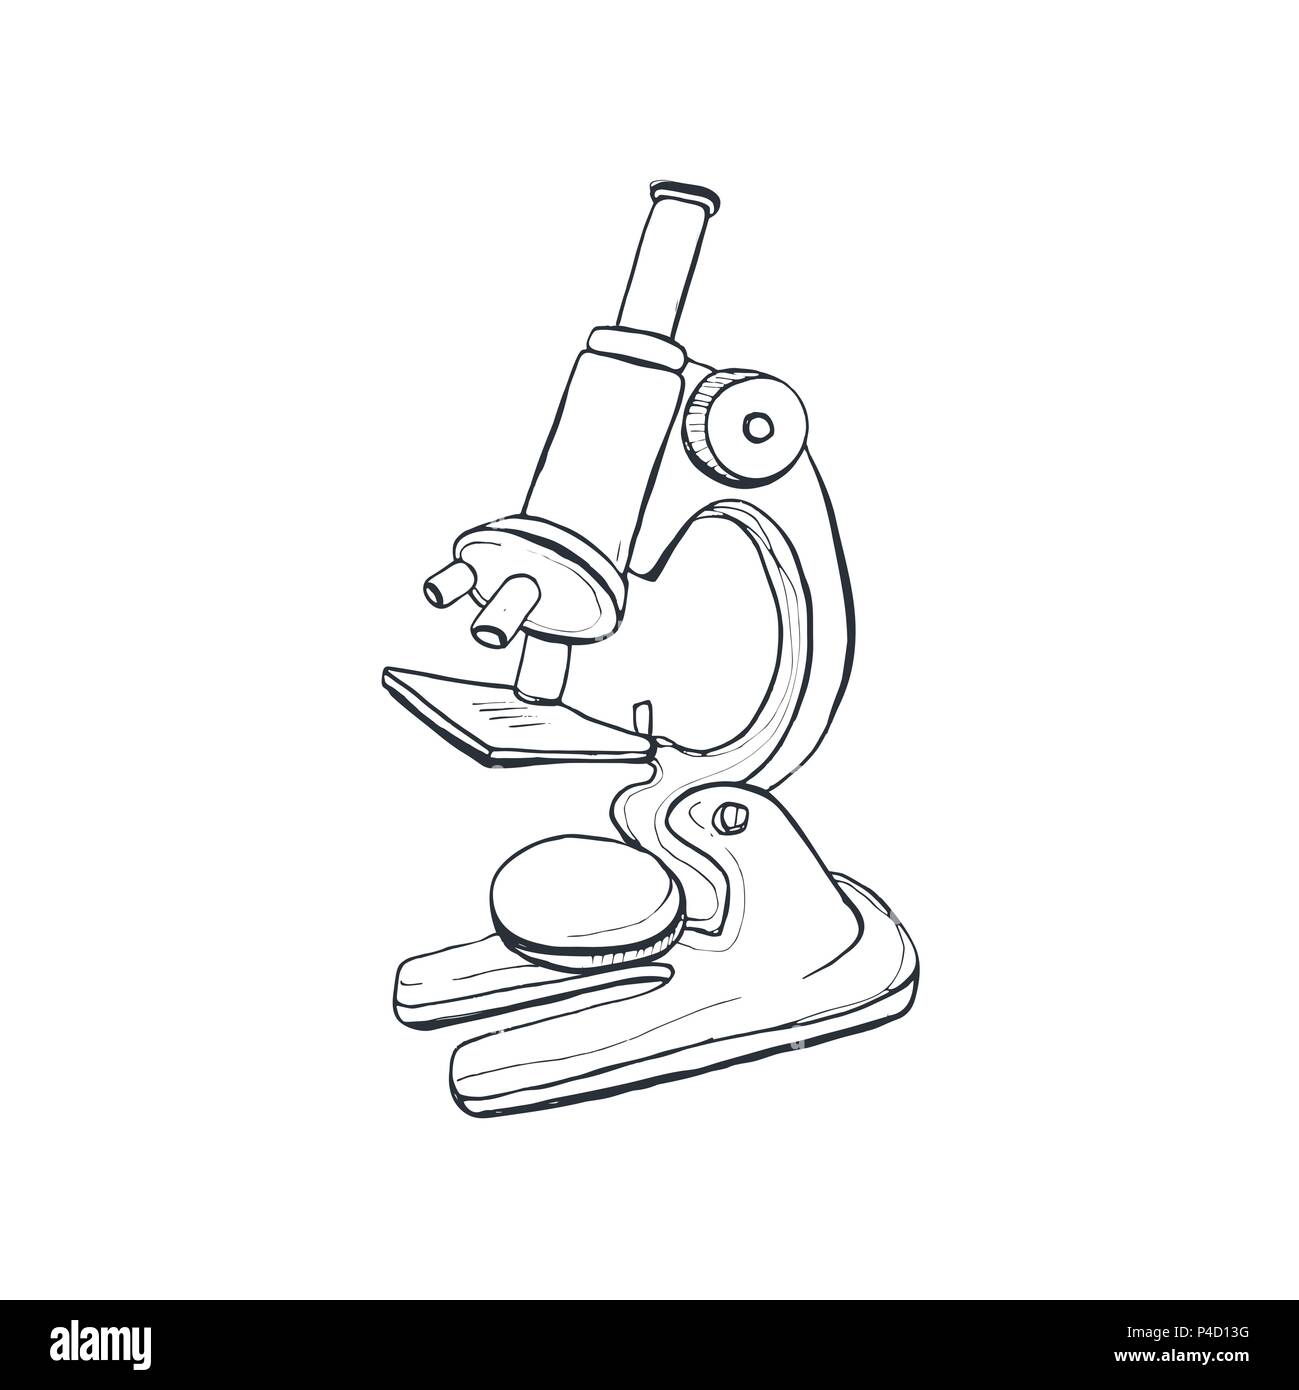 Microscope Black And White Drawing Outline Illustration Sketch Vector  Compound Microscope Drawing Compound Microscope Outline Compound Microscope  Sketch PNG and Vector with Transparent Background for Free Download